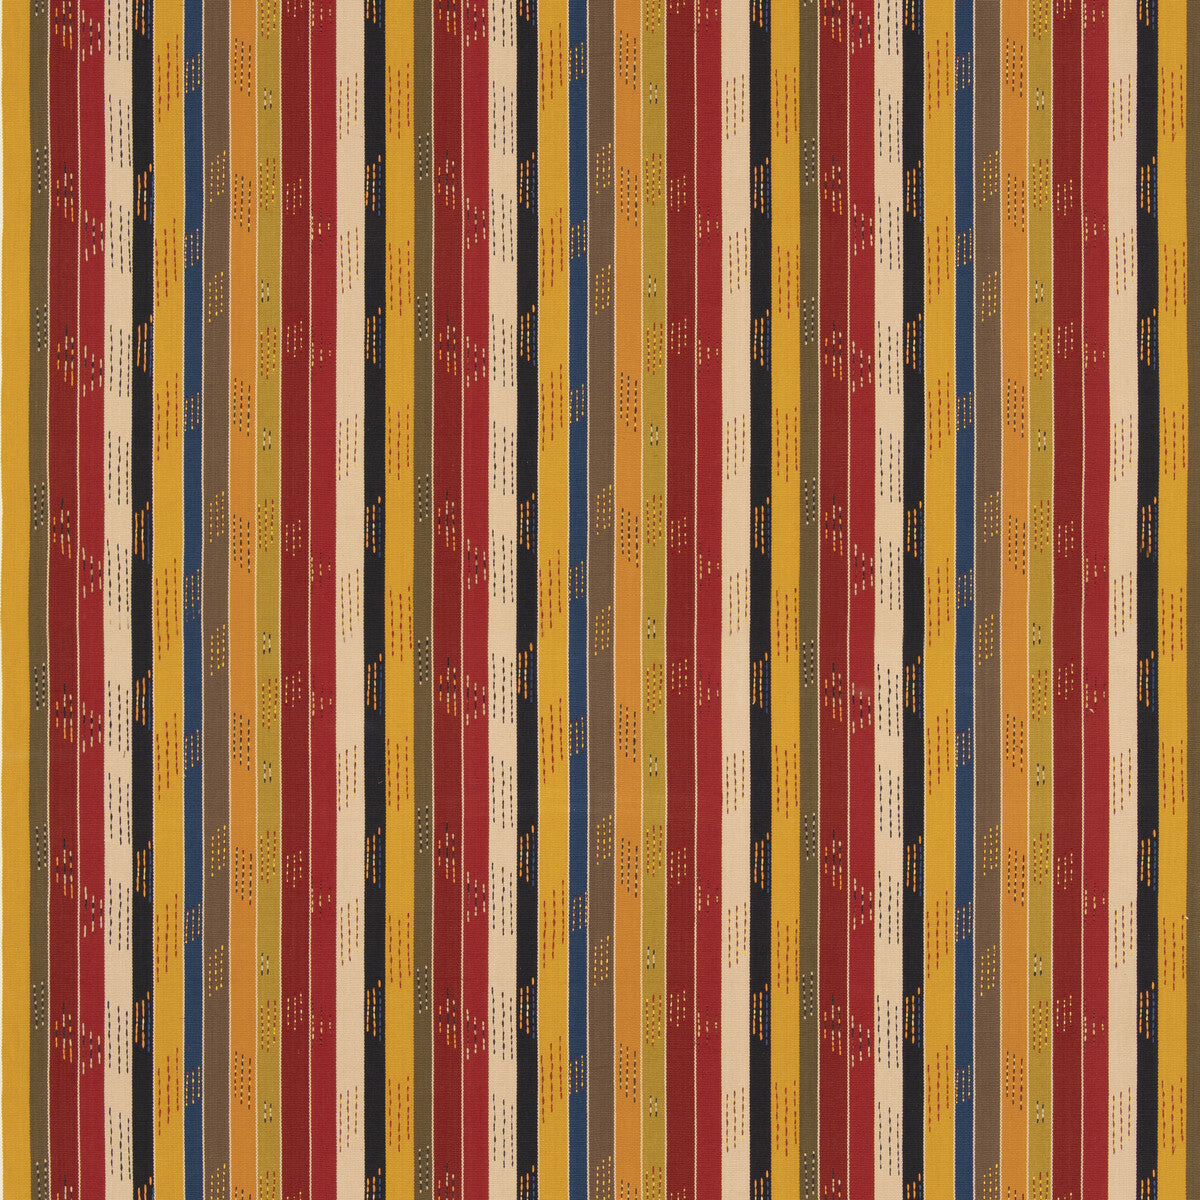 Jogalong fabric in red/ochre color - pattern BF11061.2.0 - by G P &amp; J Baker in the X Kit Kemp Stripes collection